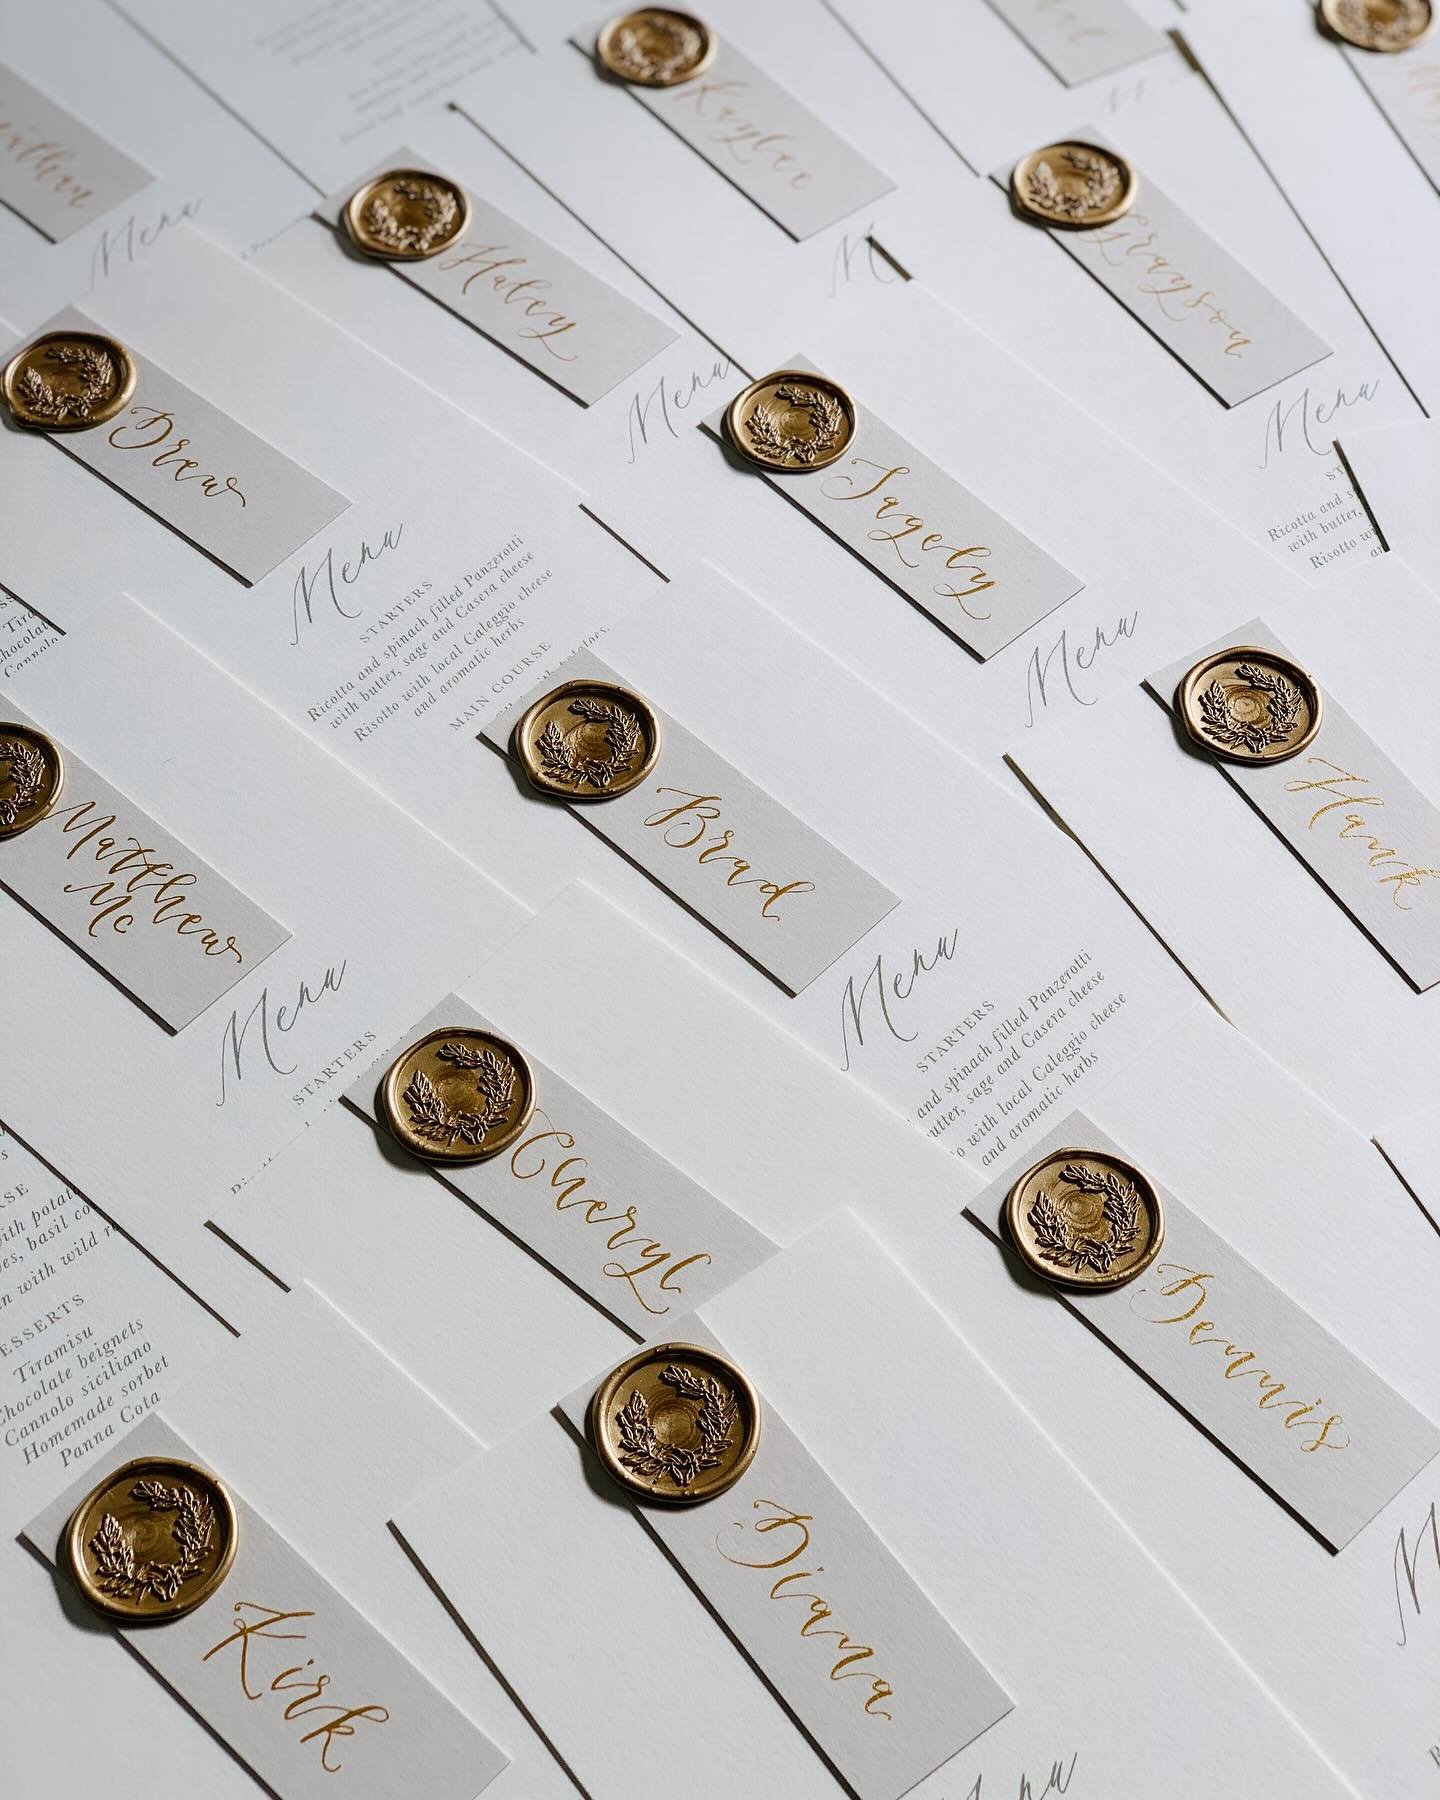 Wedding menu season is almost upon us and these pretty ones left for Italy today&mdash;guest personalised in gold calligraphy. I love to see what your guests will be having&mdash;I&rsquo;d opt for the tiramisu every time! 

#weddingmenus 
#weddinggue